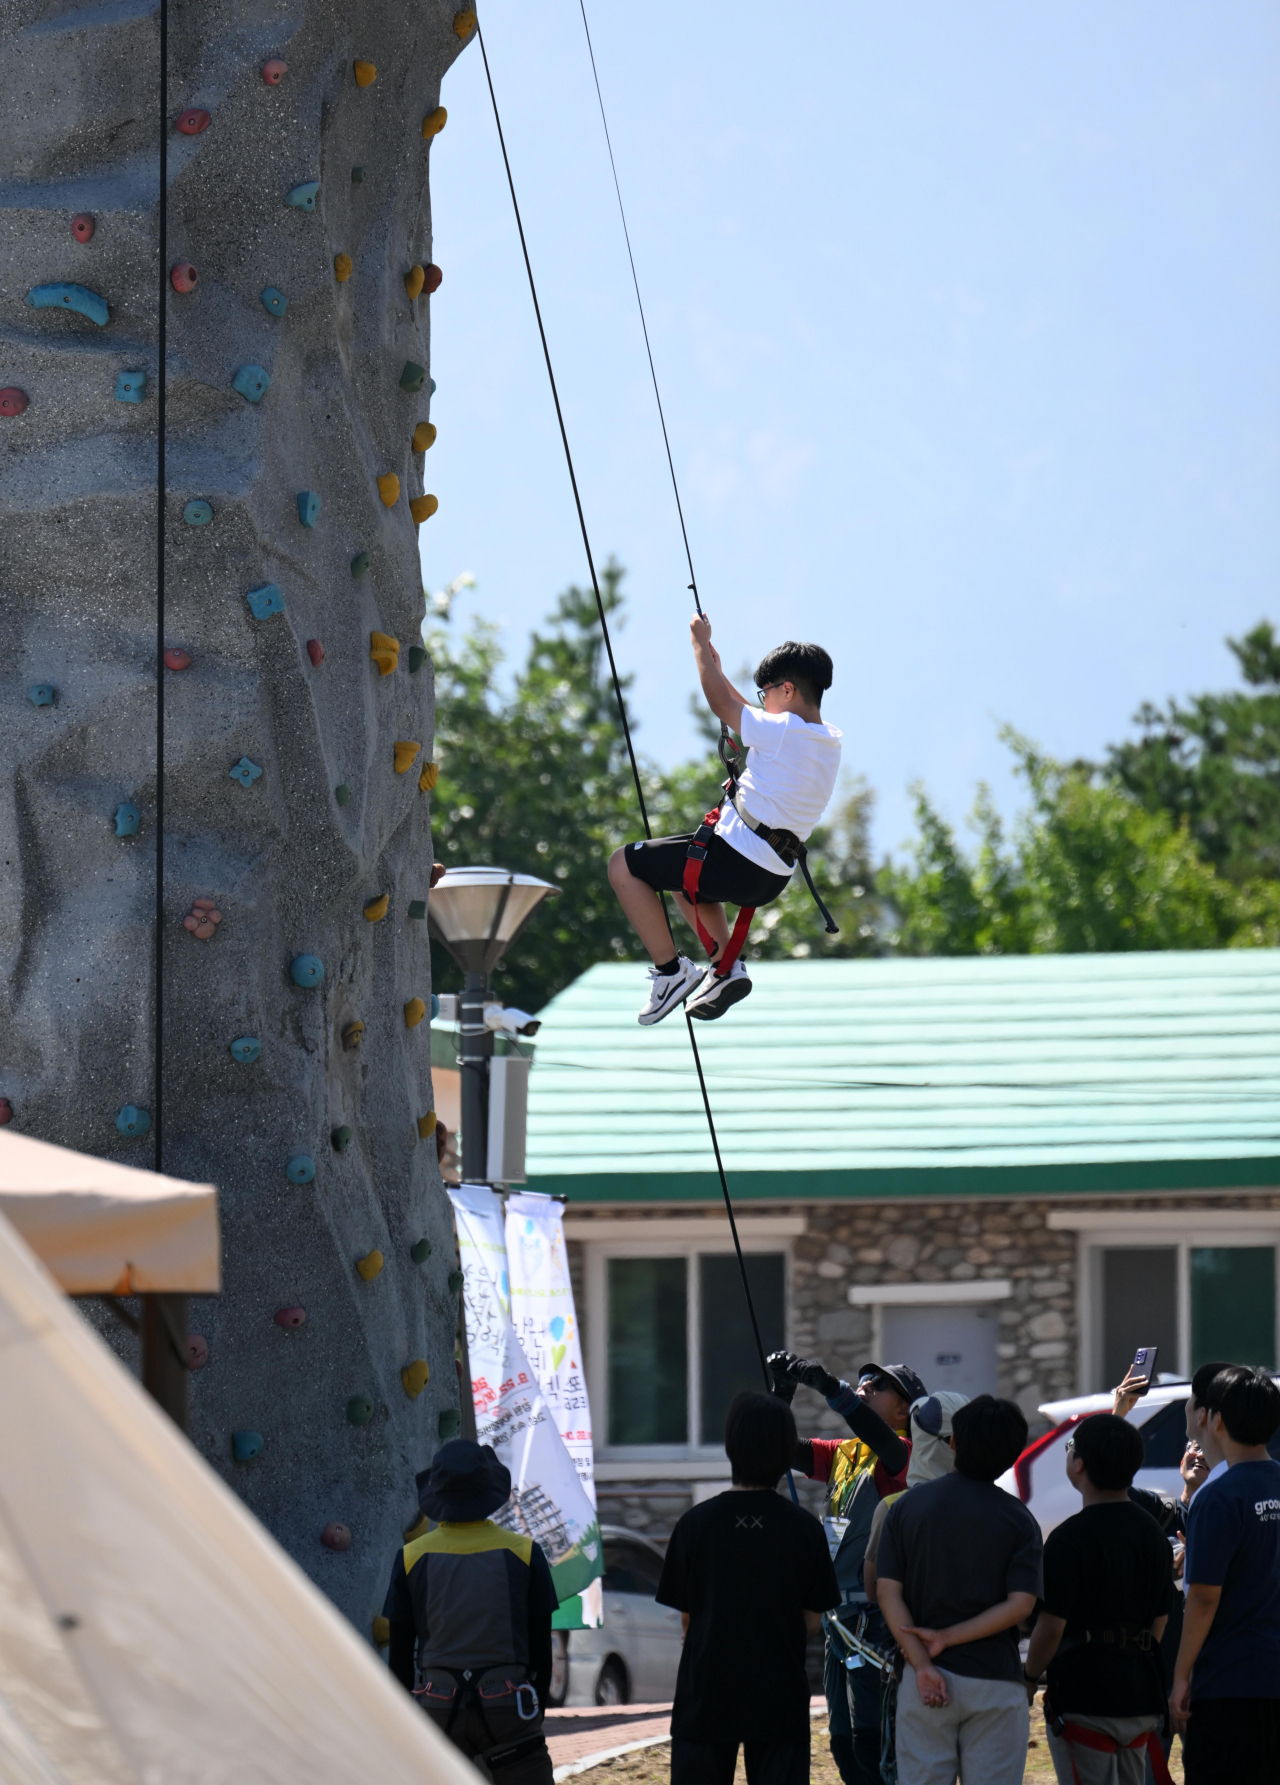 Children take part in a rock climbing experience at the Gangwon Forestry Exhibition 2023 in Goseong, Gangwon Province on Friday. (Lee Sang-sub/The Korea Herald)